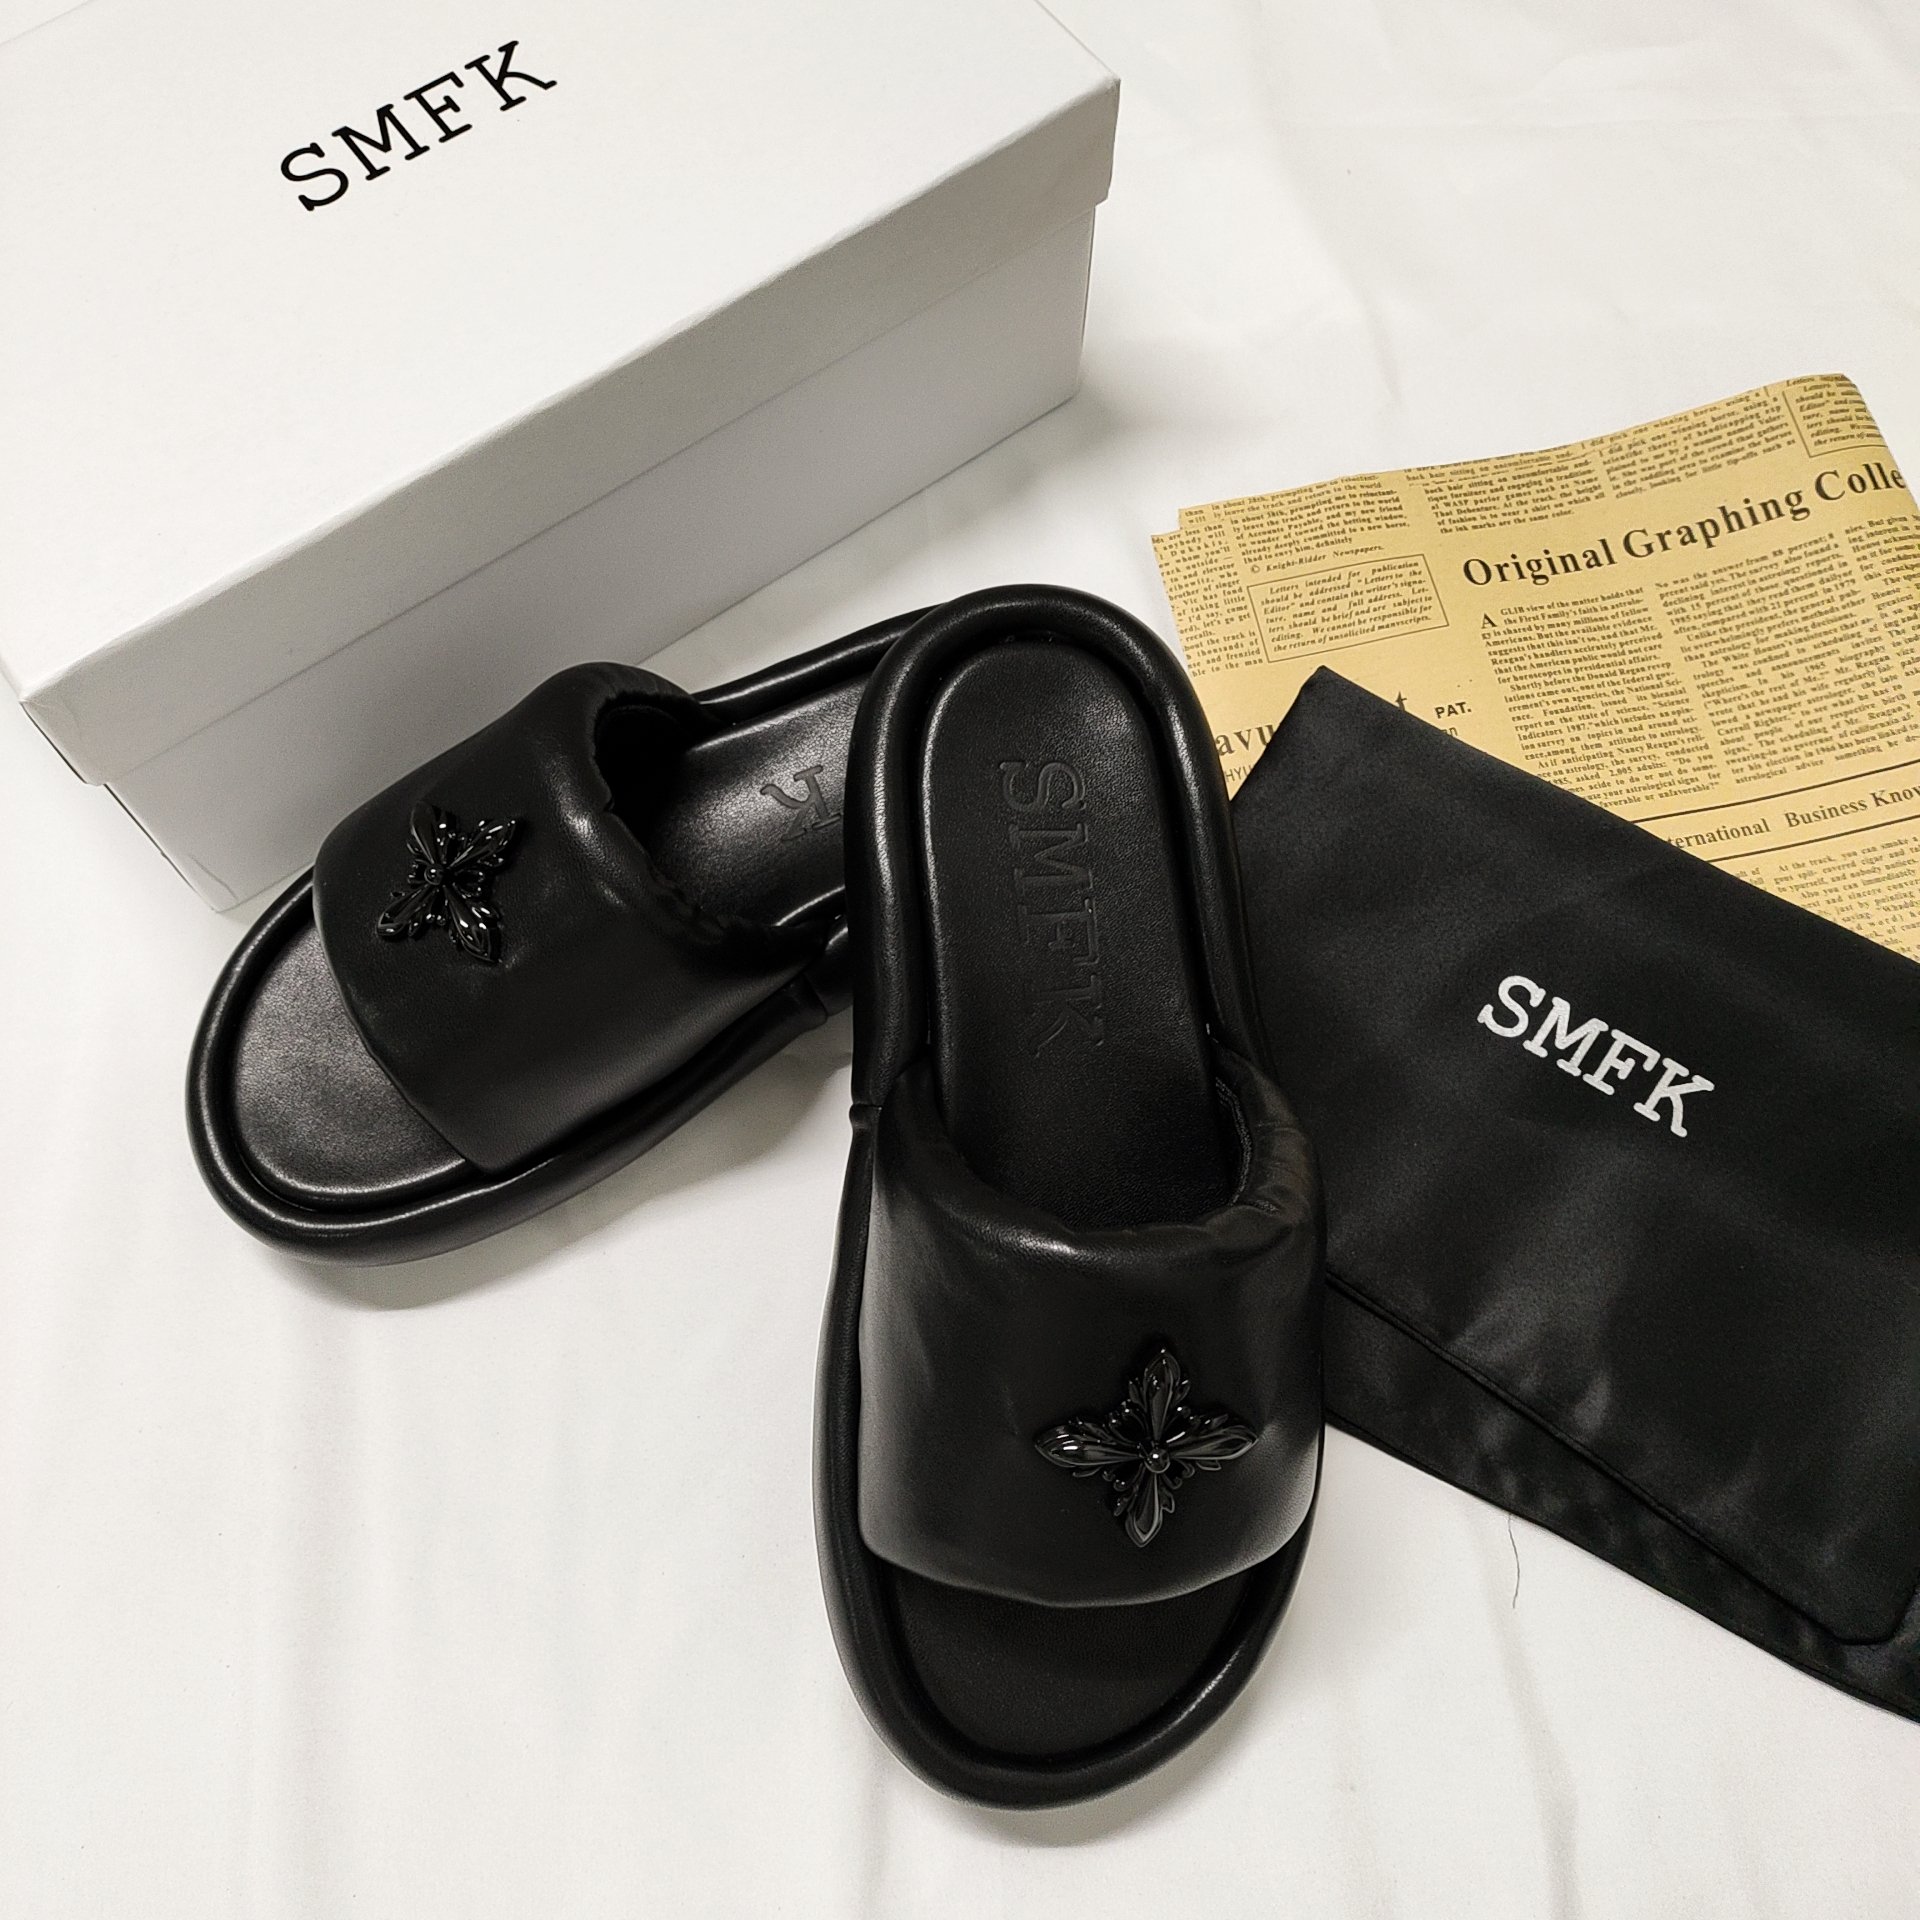 Smfk solid black slippers top quality 